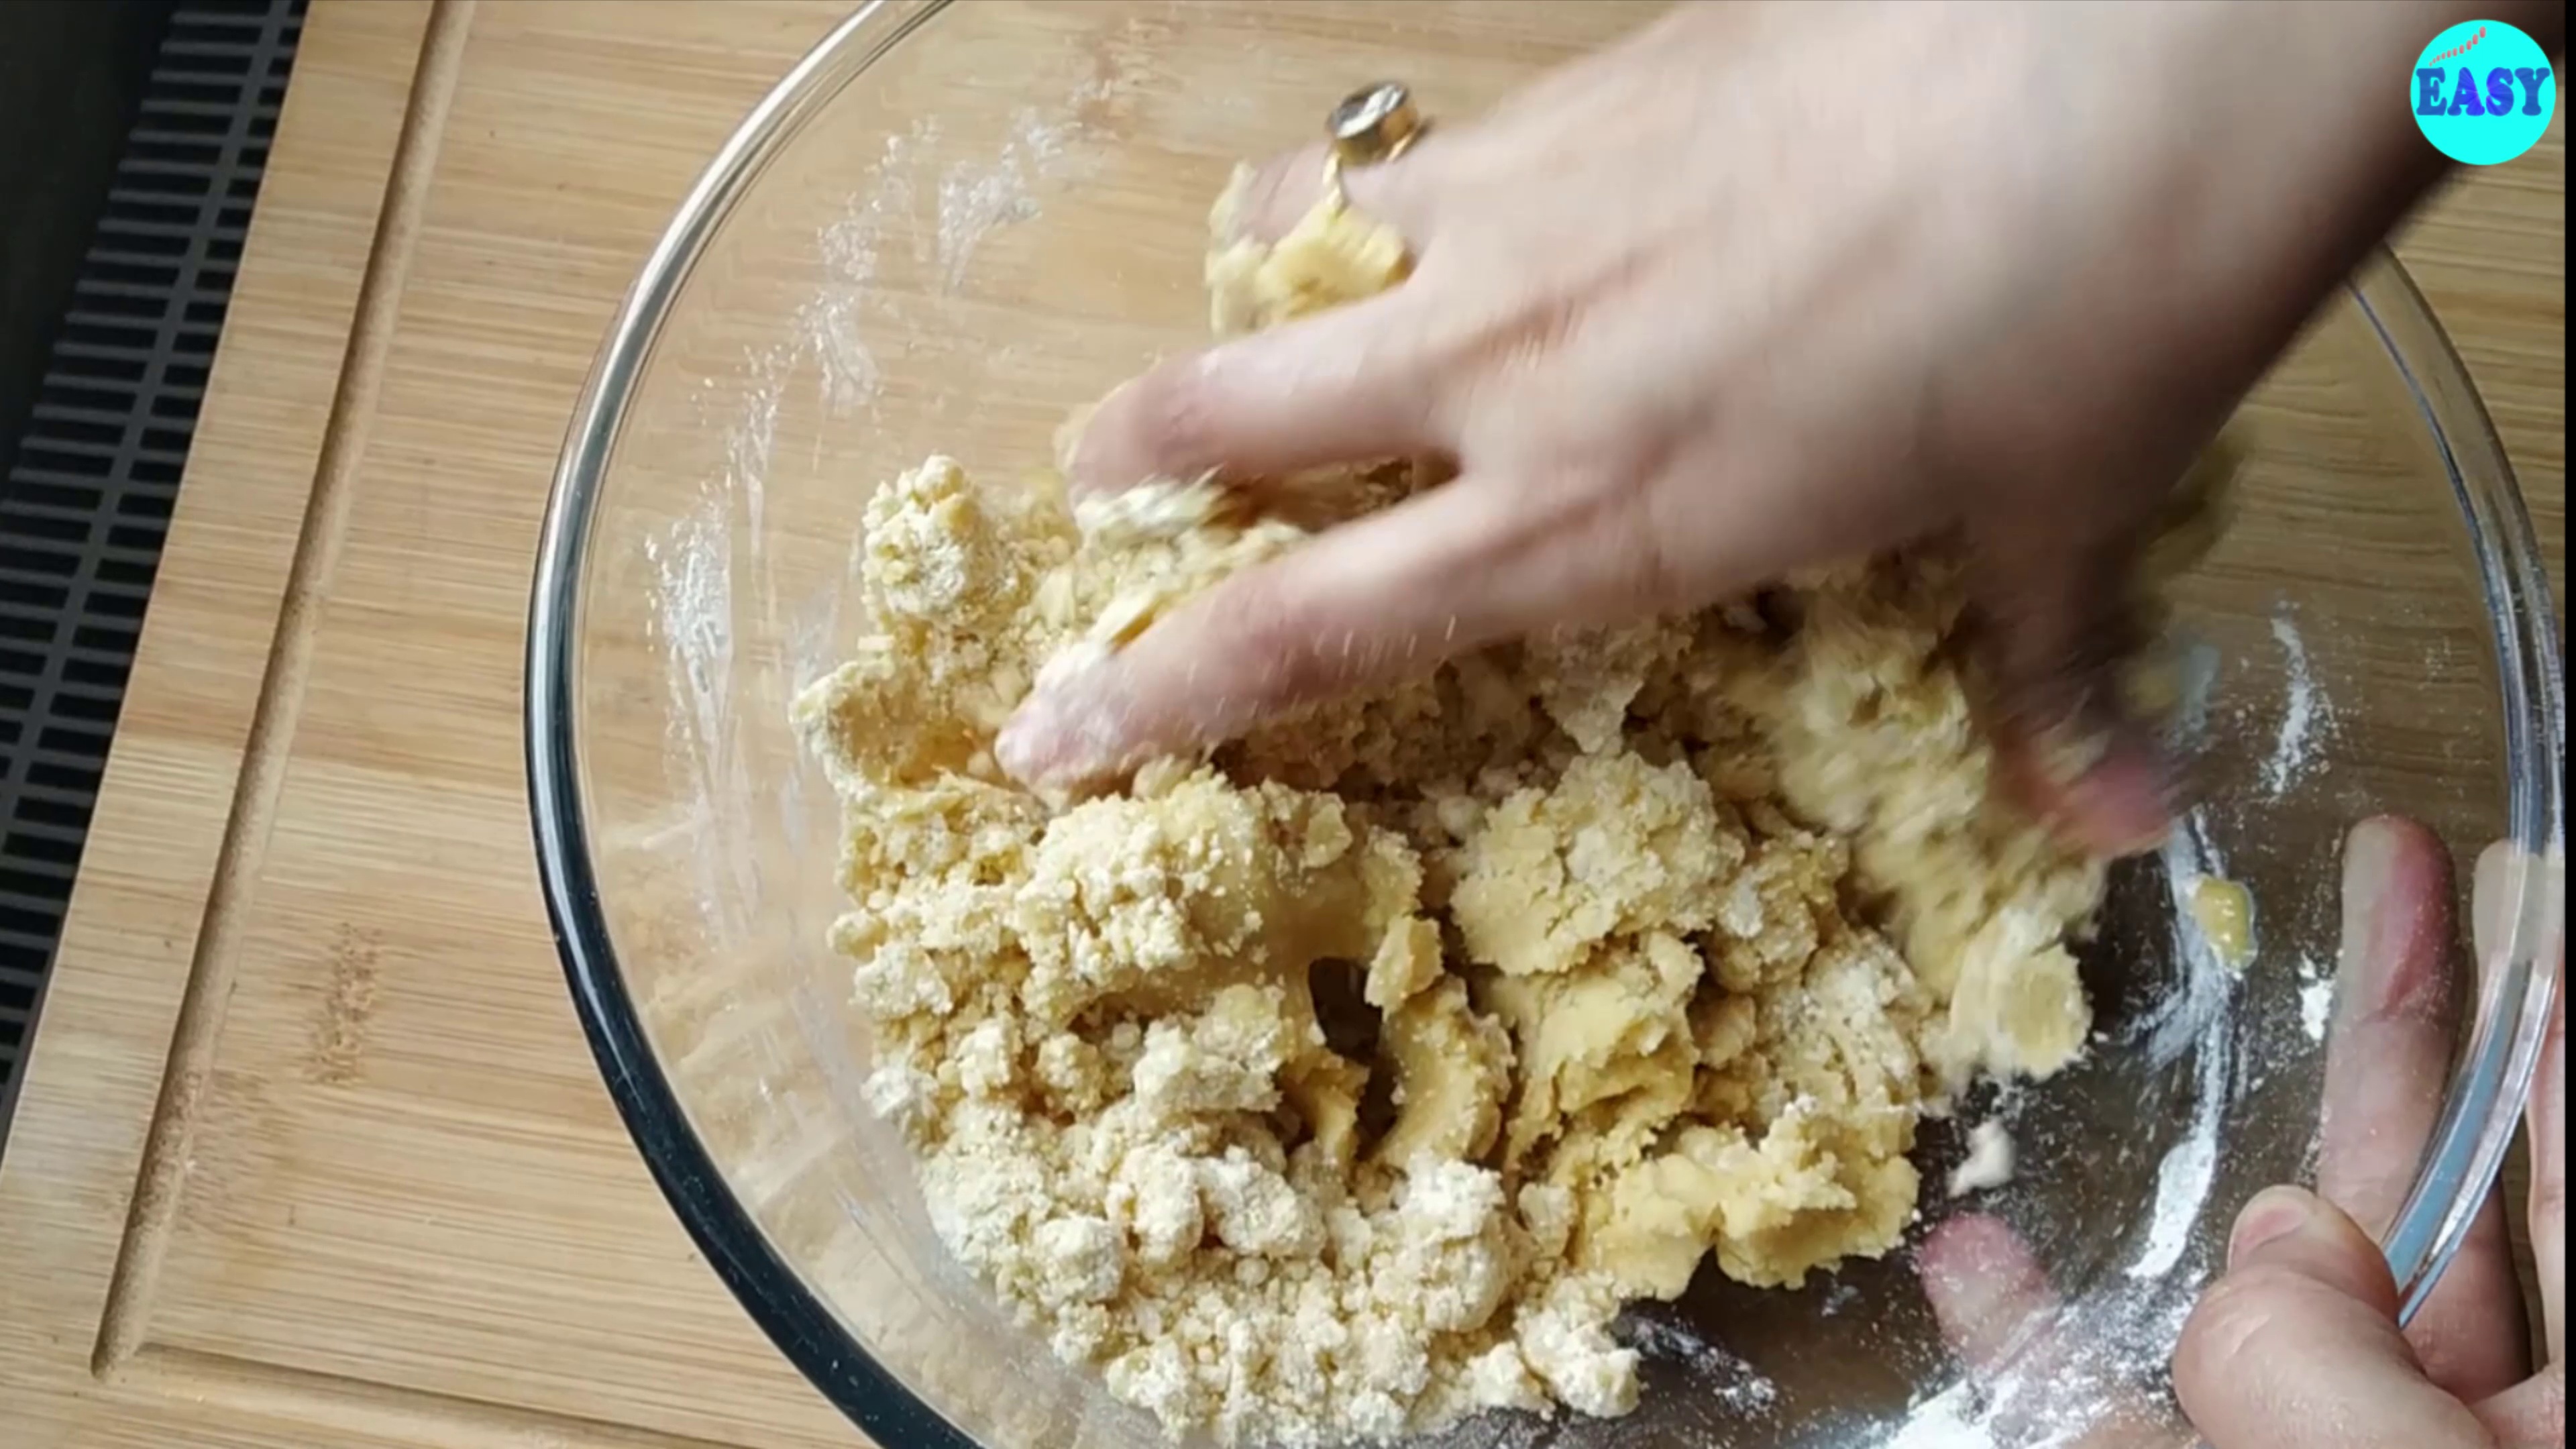 Step 4 - Gently bring together the mixture with your fingers to form a dough without adding any other liquid. If you are not able to bring together the mixture add 1-2 tablespoon of ghee. You just need to bring together the mixture to a form a smooth cookie dough.